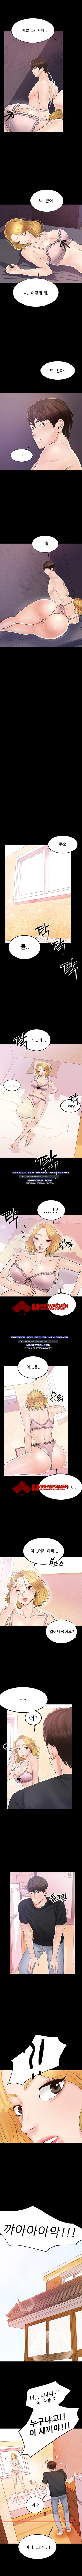 High Tension Raw - Chapter 5 Page 4